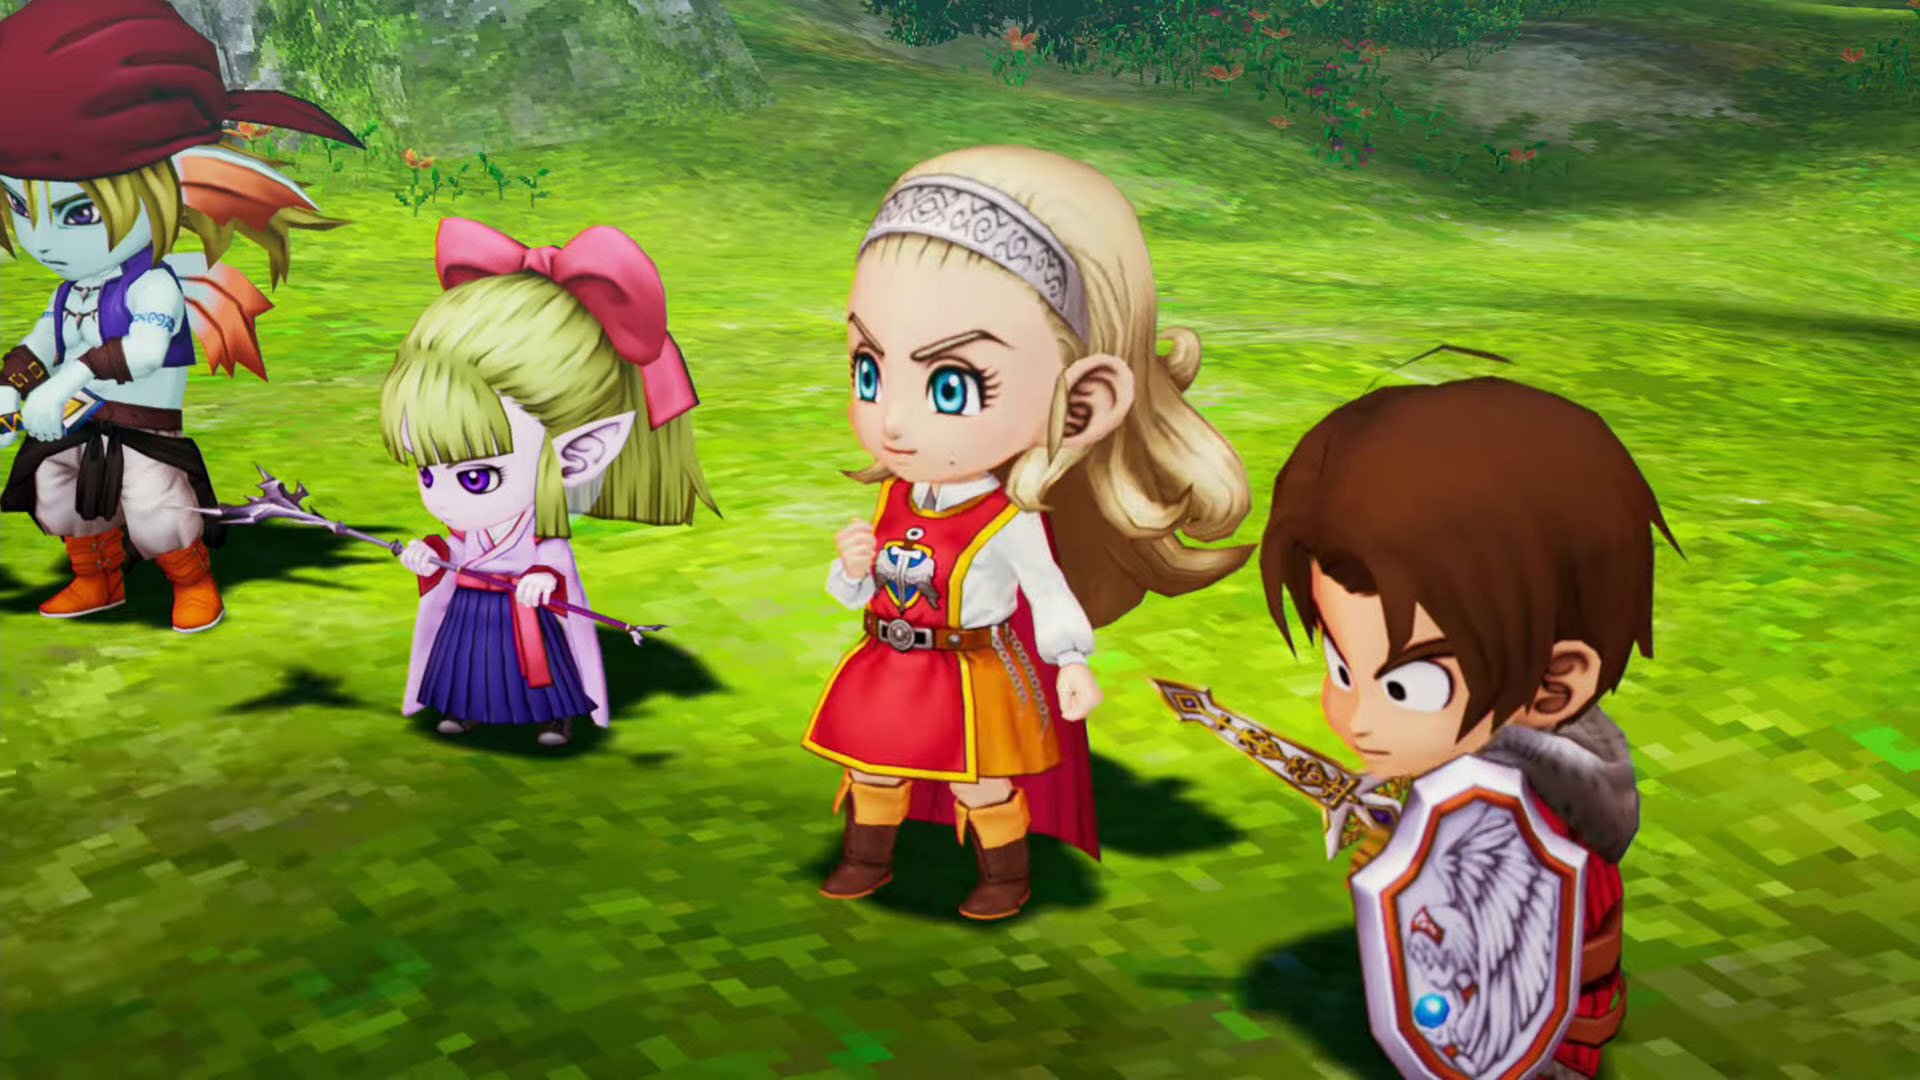 Dragon Quest 11 launches on Stadia with discounts across platforms